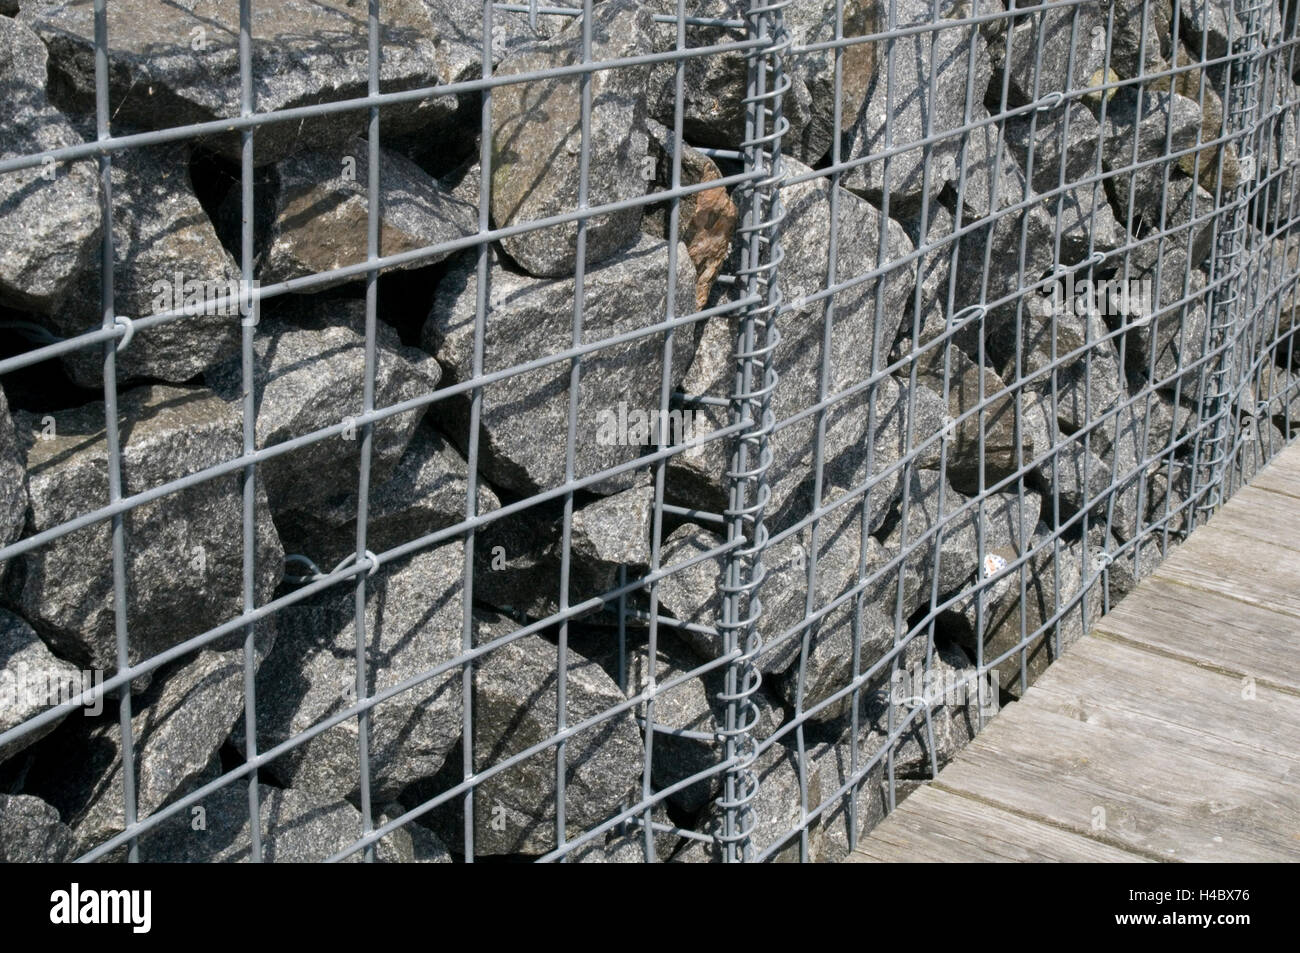 gabion gabions cage cages full of rock rocks stone stones building feature features architectural baskets welded mesh walls wall Stock Photo